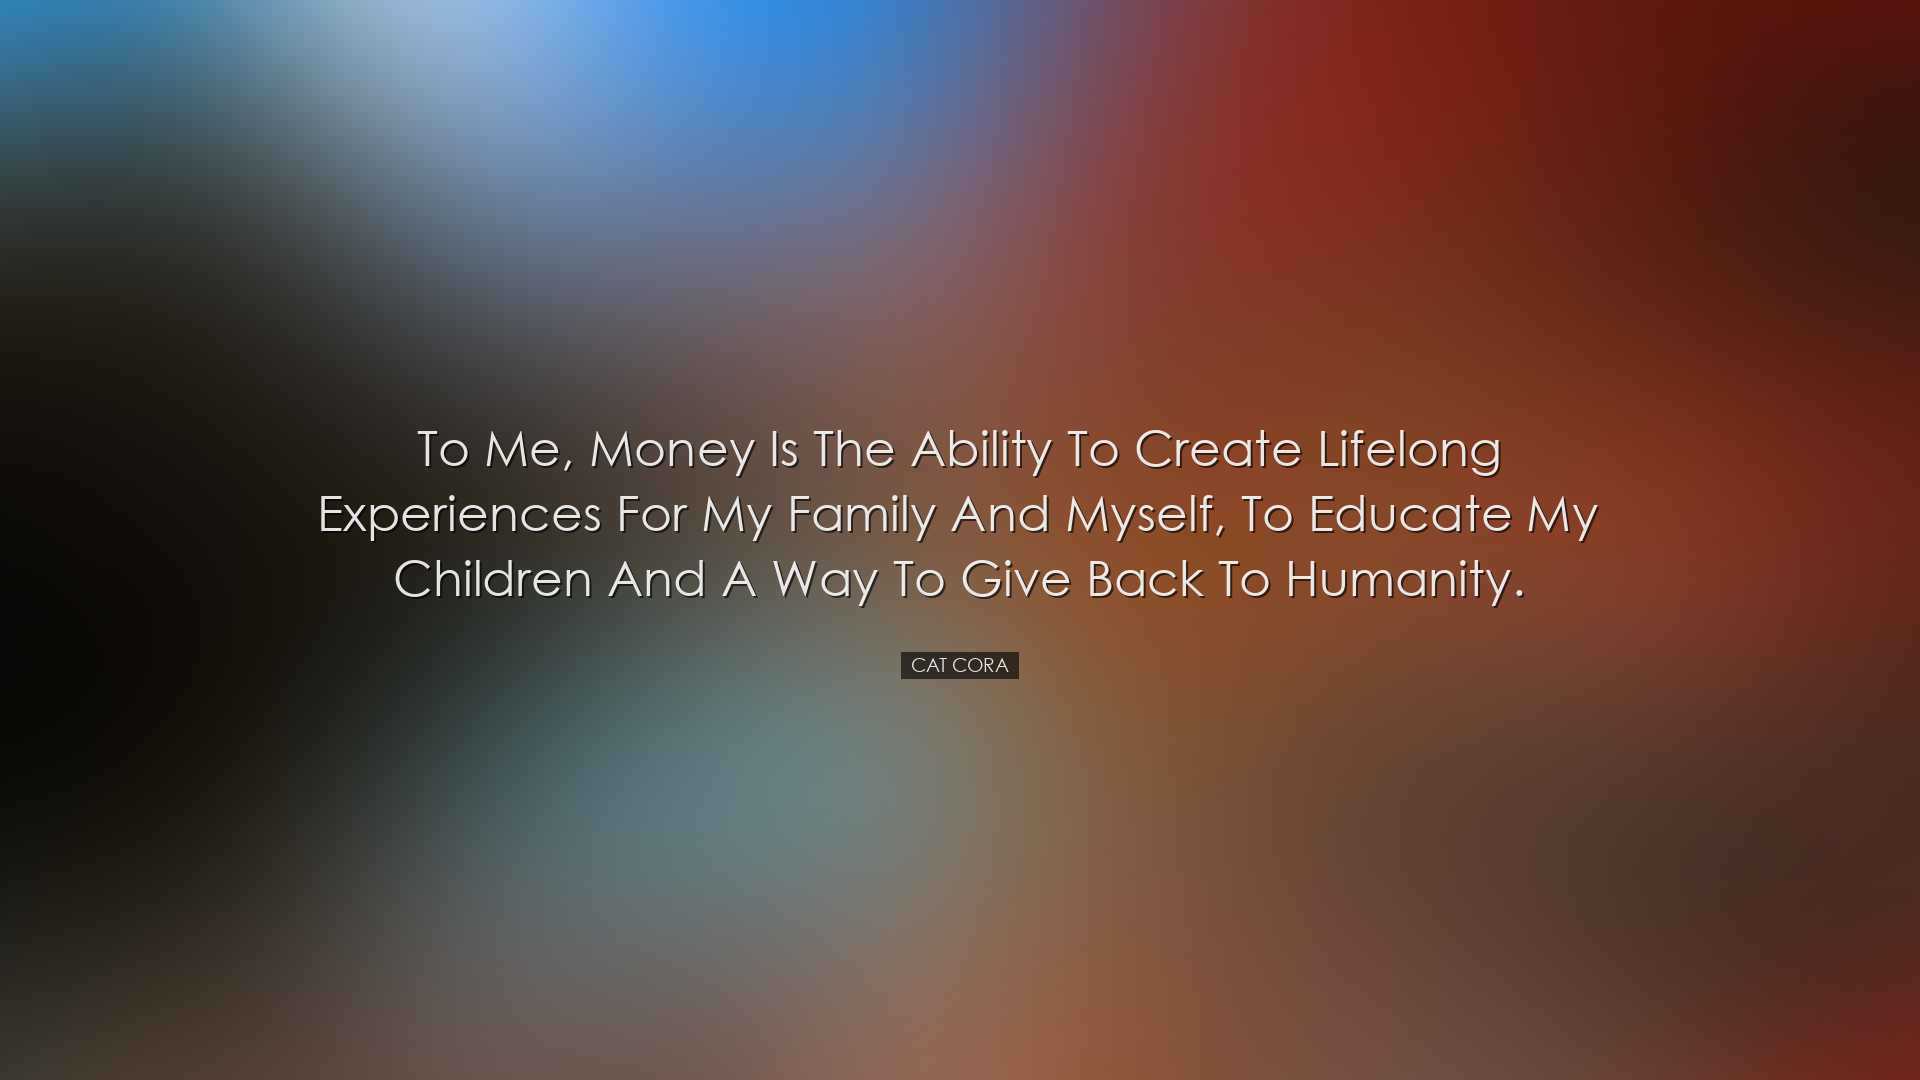 To me, money is the ability to create lifelong experiences for my